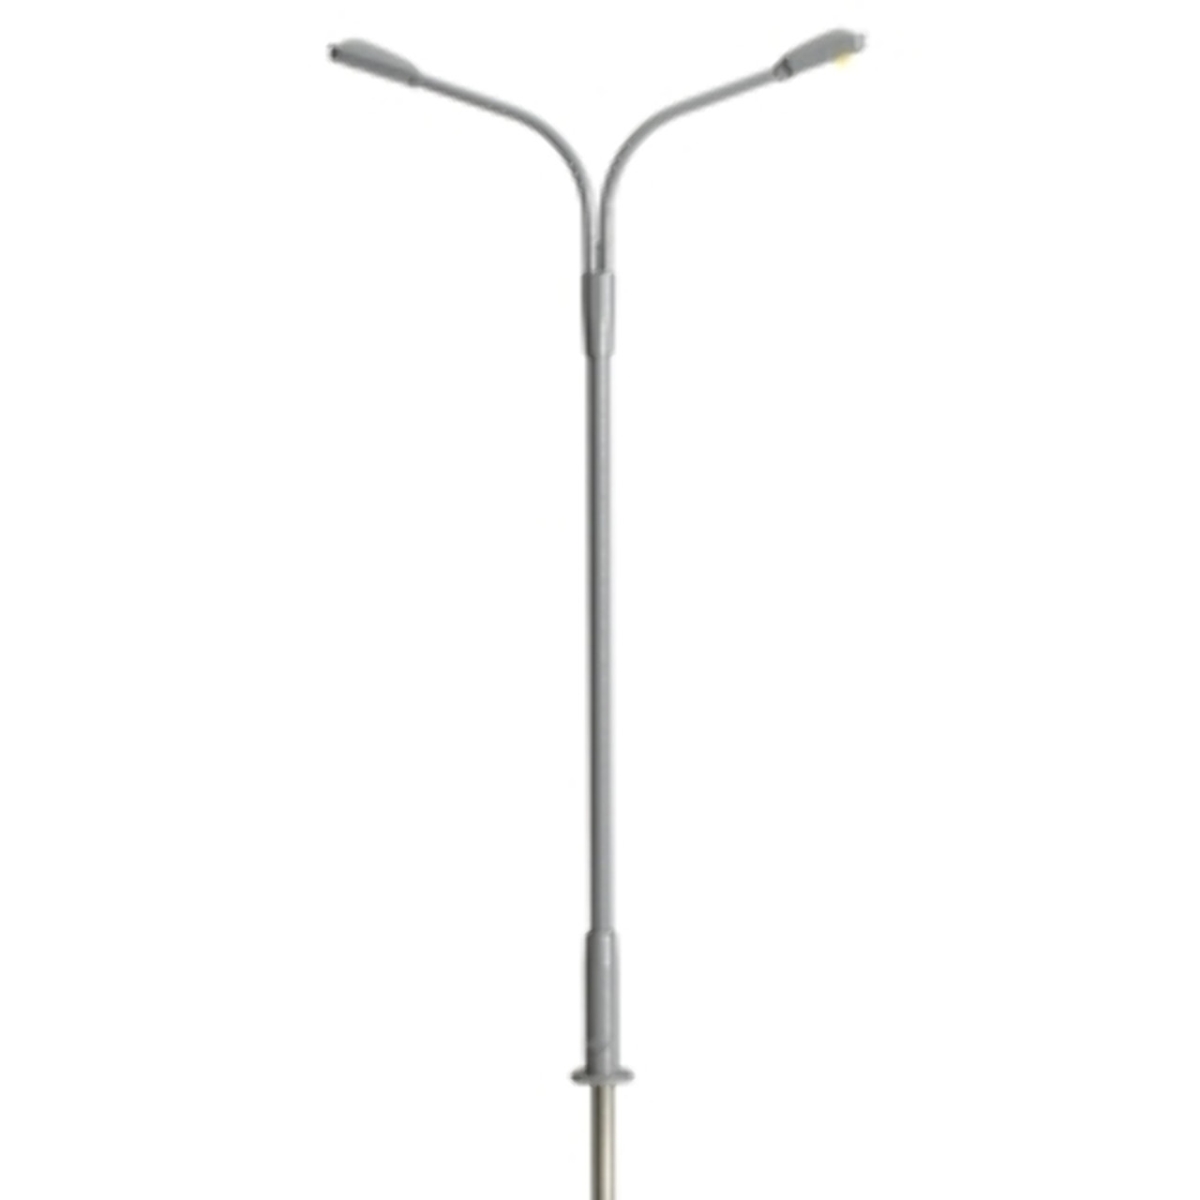 Picture of Atlas ATL70000167 HO Scale Double Arm LED Streetlight, Light Gray - Pack of 3